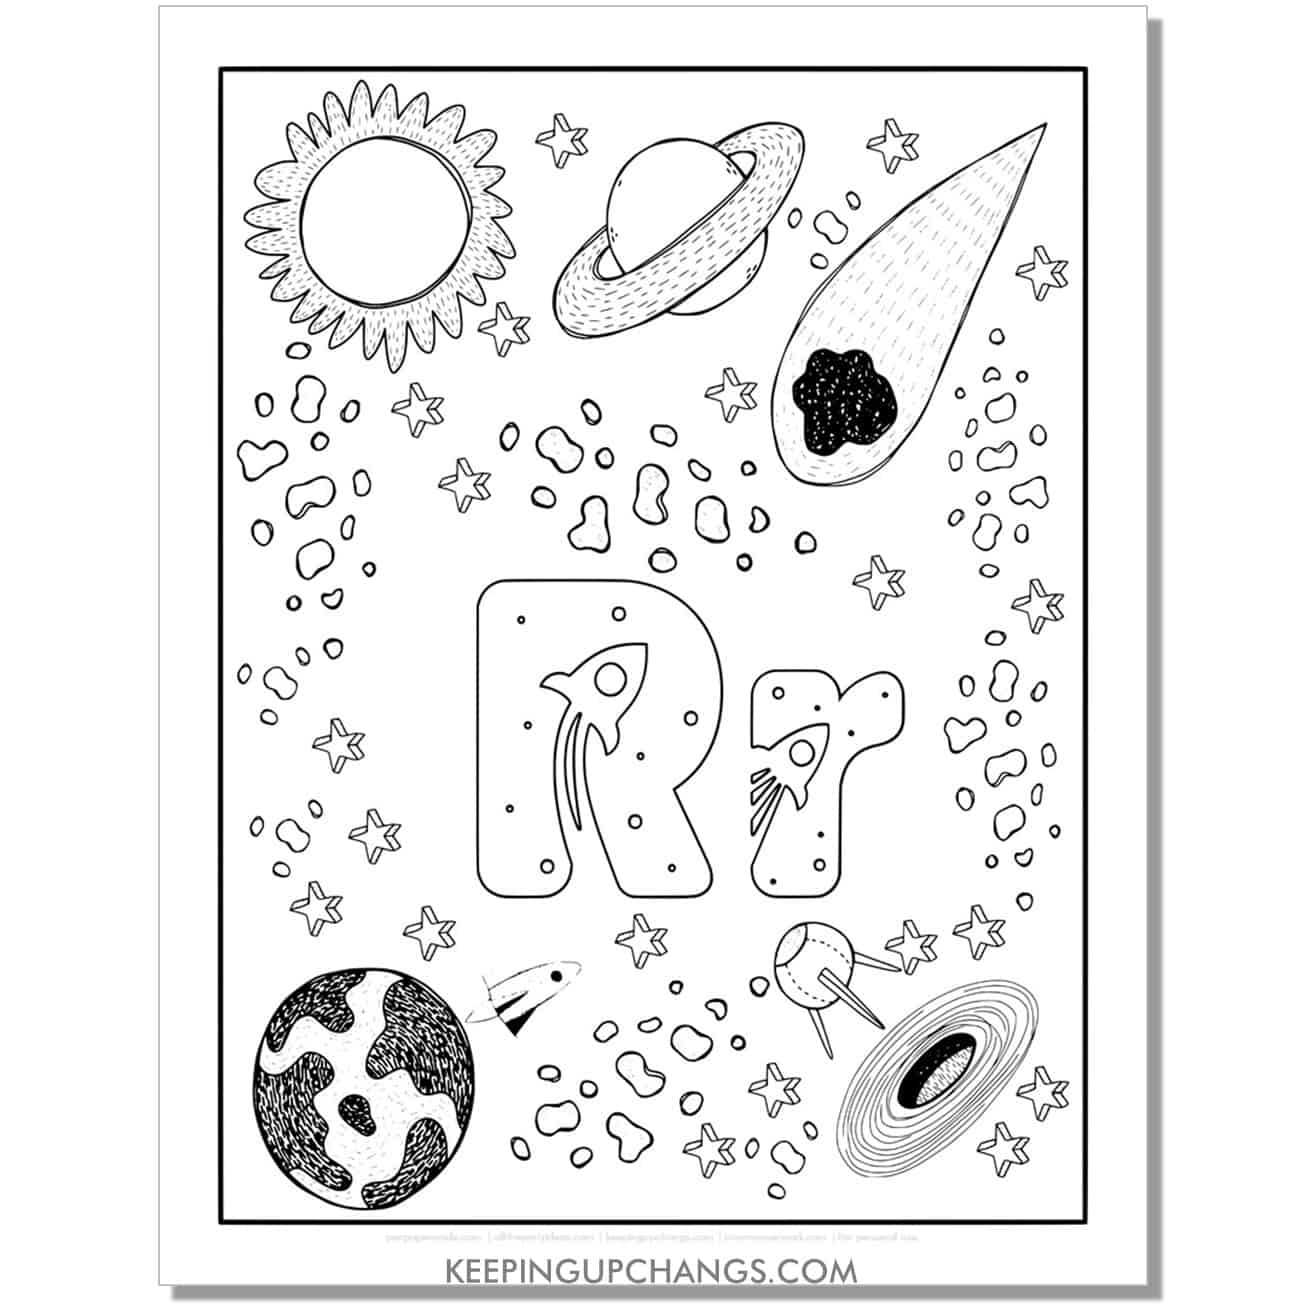 free alphabet letter r coloring page for kids with rockets, space theme.